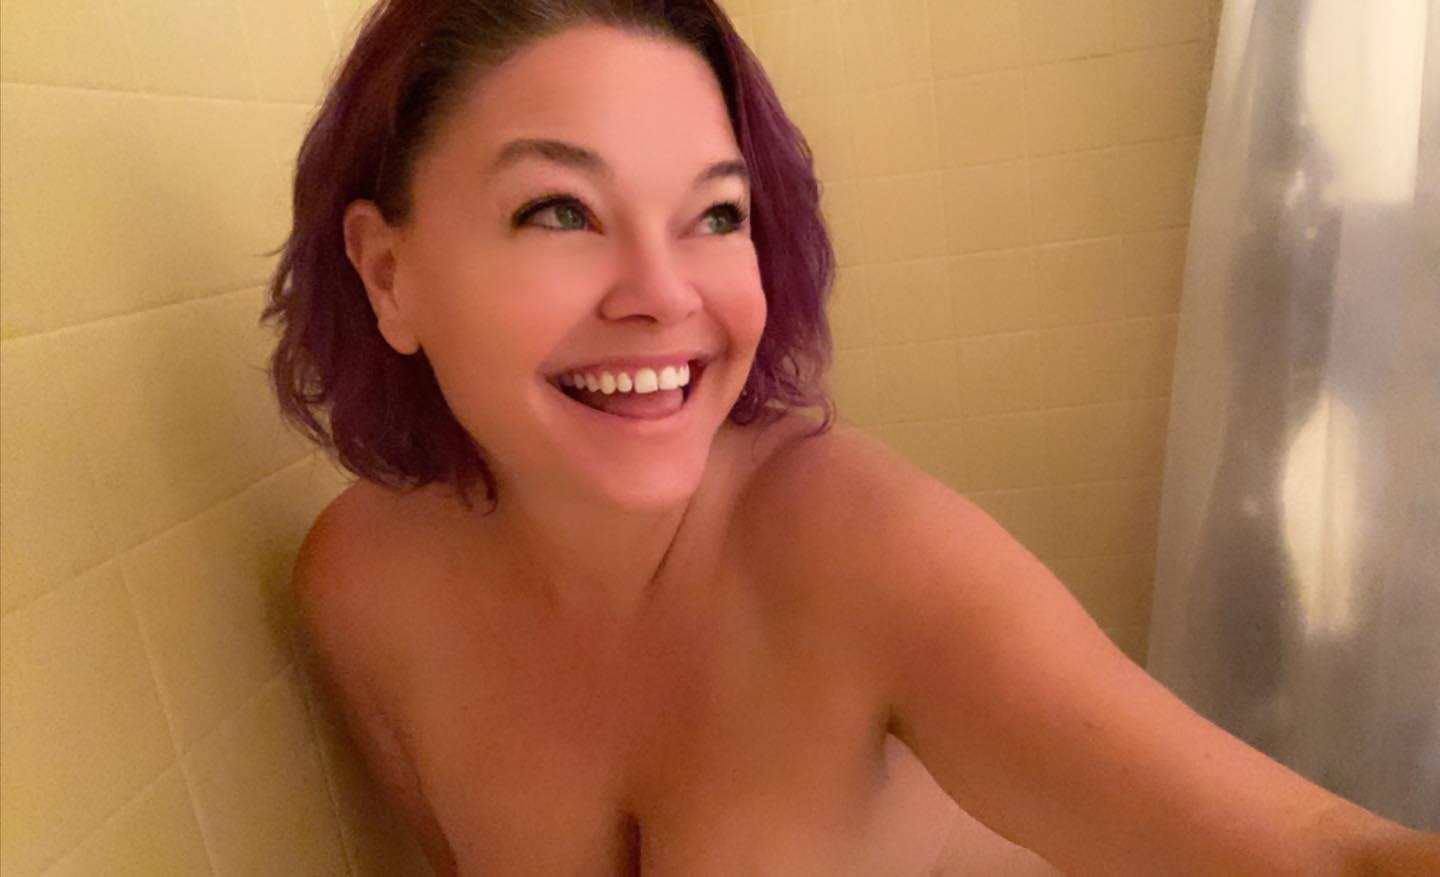 Shower pics for my OnlyFans peeps!! These will be up anytime you subscribe in the main feed. Cone check out my weight loss progress. 

#showerthoughts #fanaccount #showertime